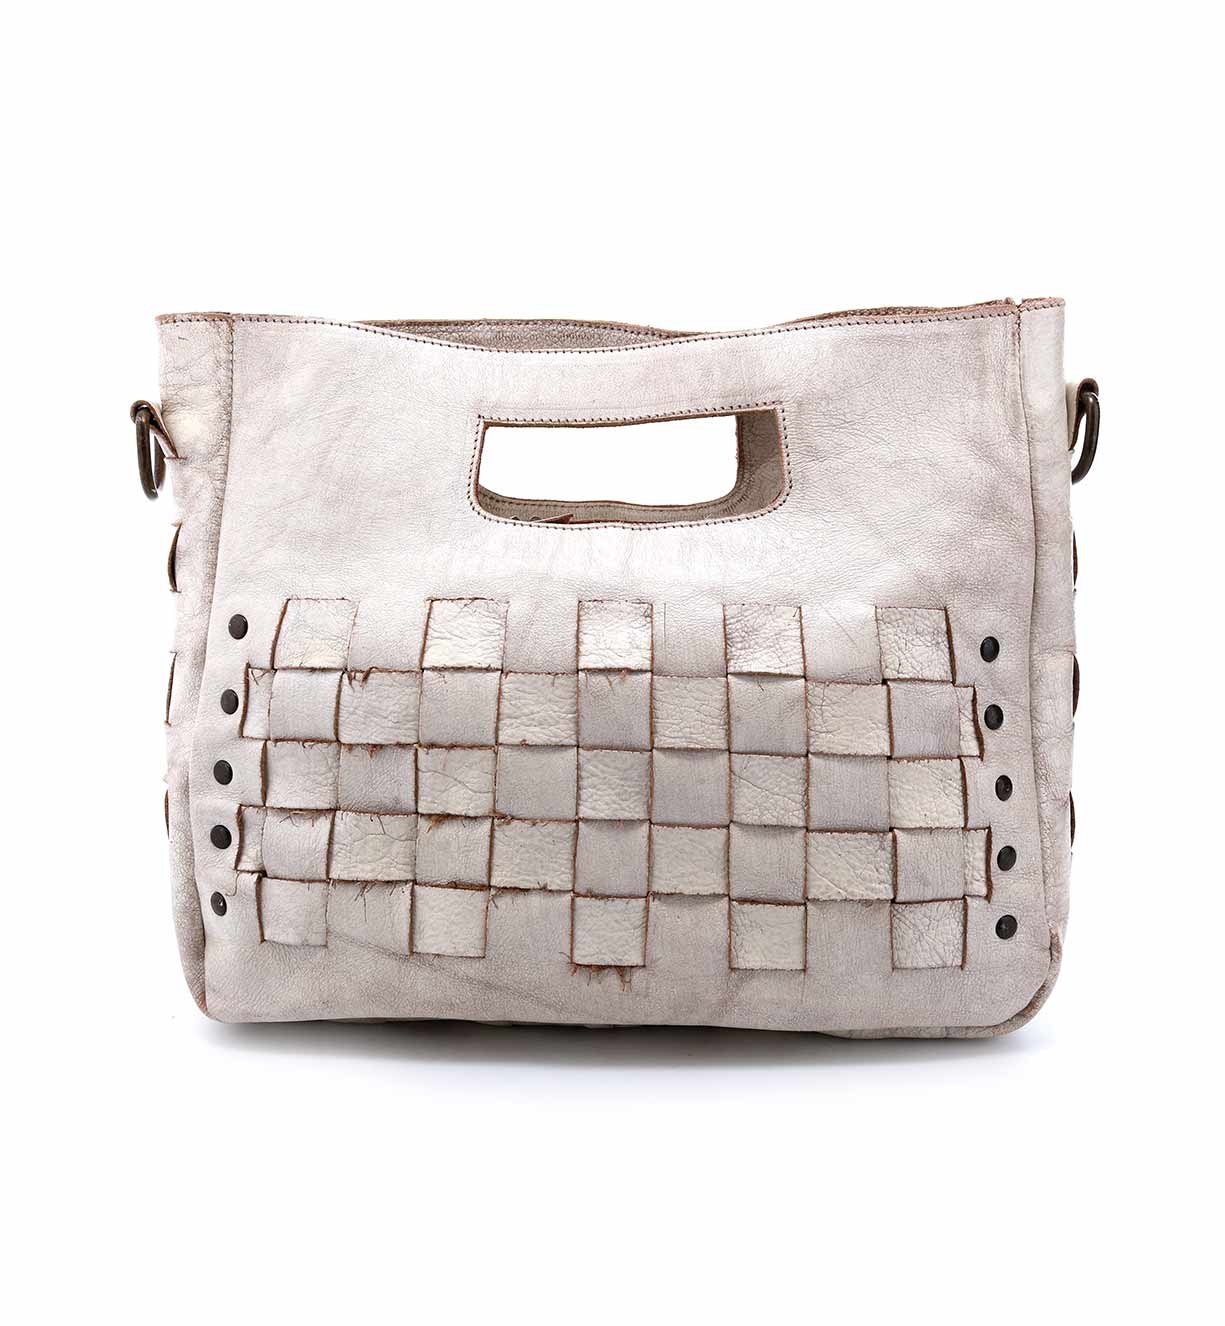 A white leather Orchid bag with woven details by Bed Stu.